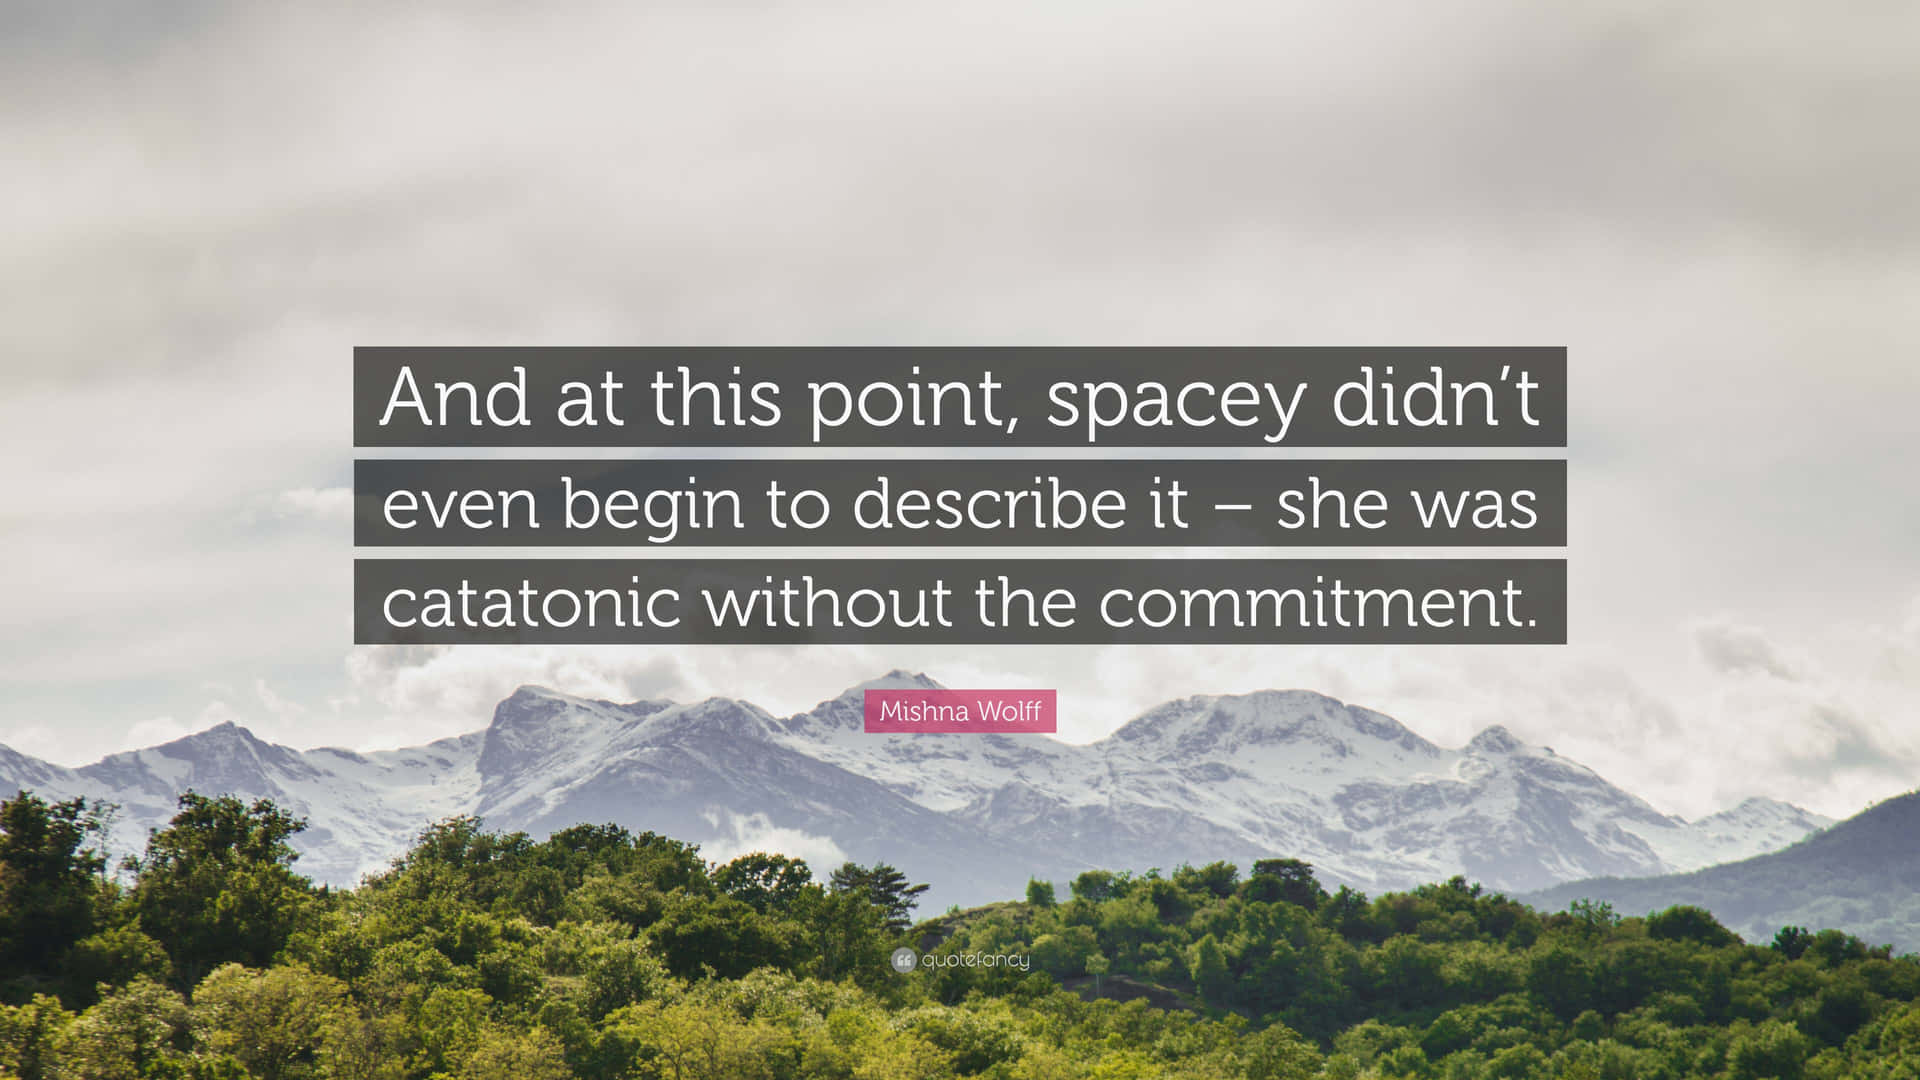 A Quote About Space And This Point Space Didn't Even Begin To Describe It She Catalytic Wallpaper